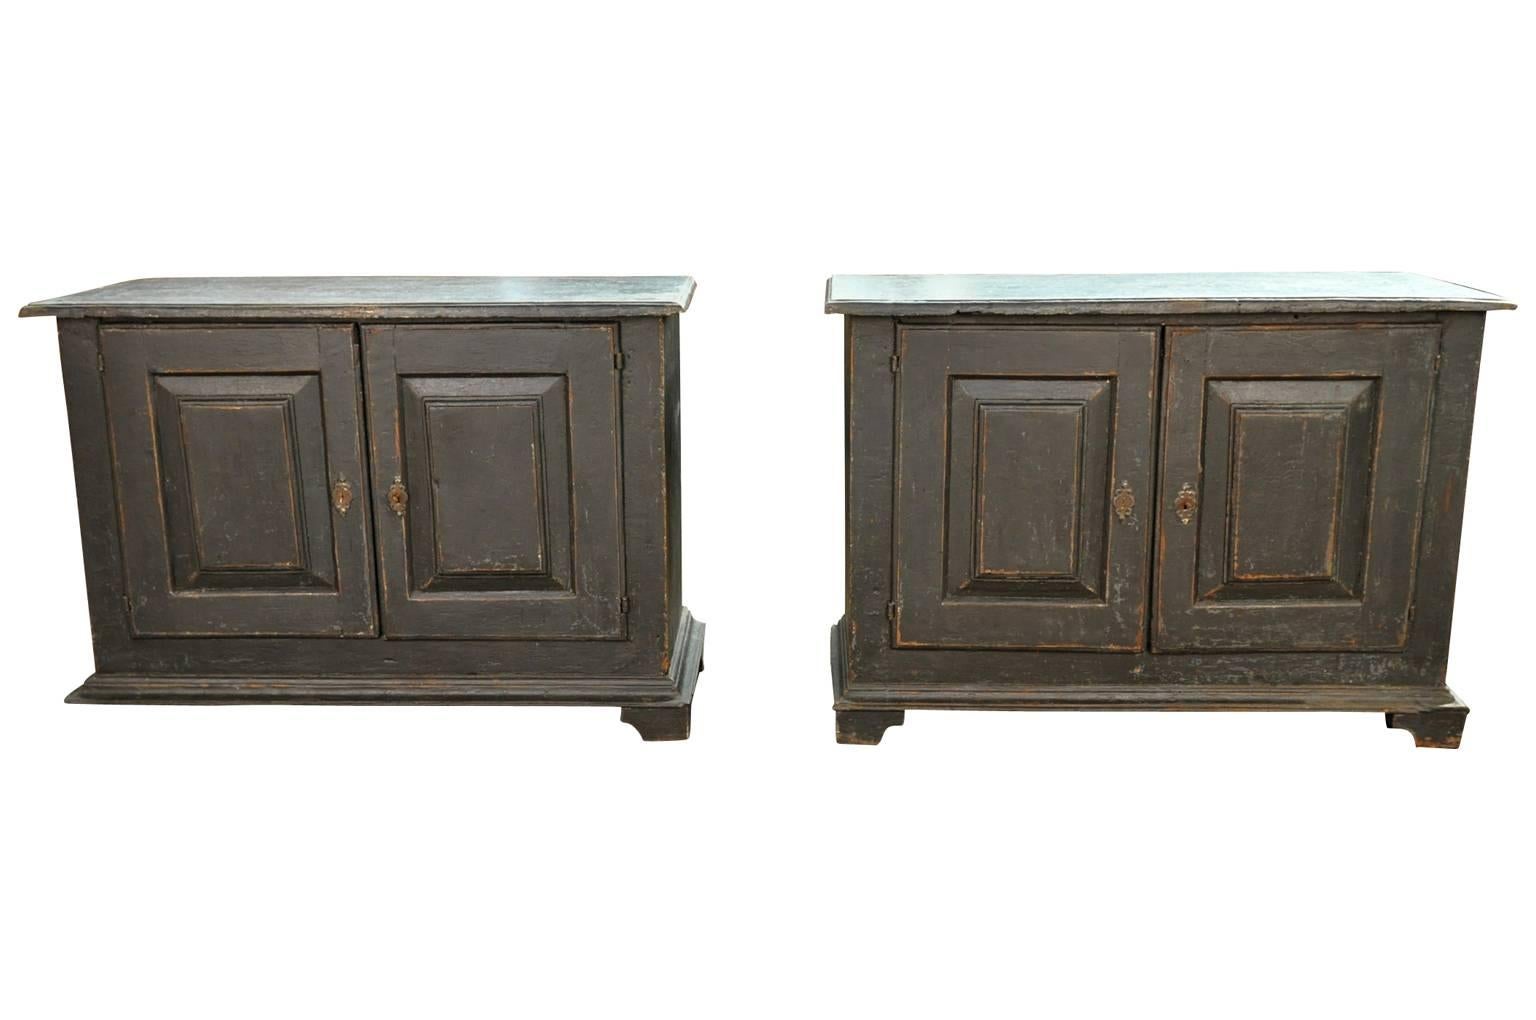 A very handsome pair of 18th century buffets from Spain. Very soundly constructed from painted wood with boldly molded door panels raised on plinth feet. Perfect cabinets to flank a fireplace. These buffets may be sold as a pair of individually. The